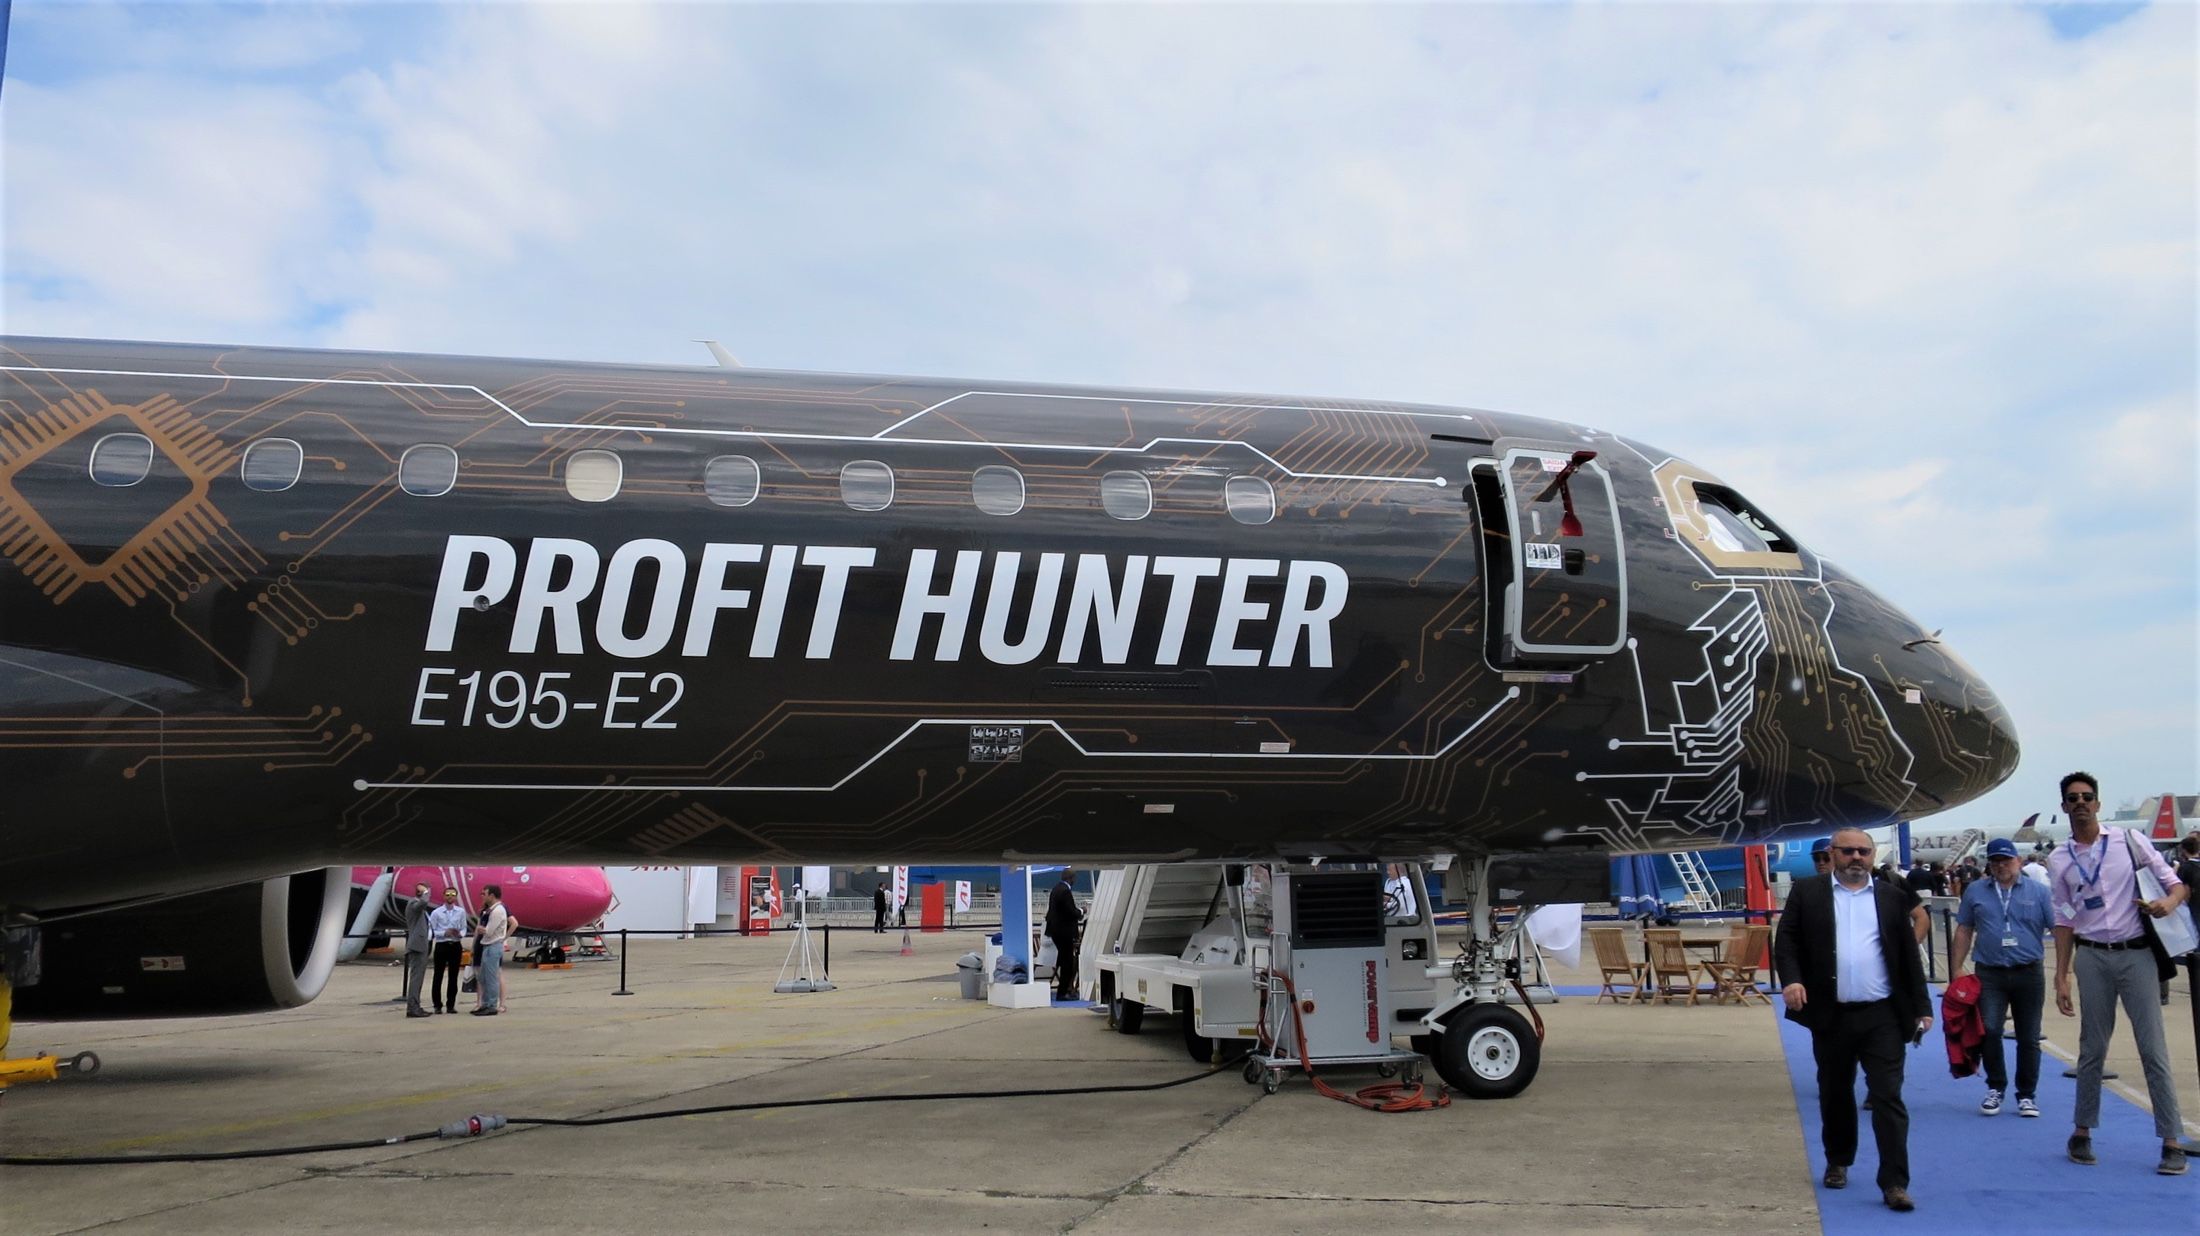 An Embraer E195-E2 in Profit Hunter livery on display at an air show.